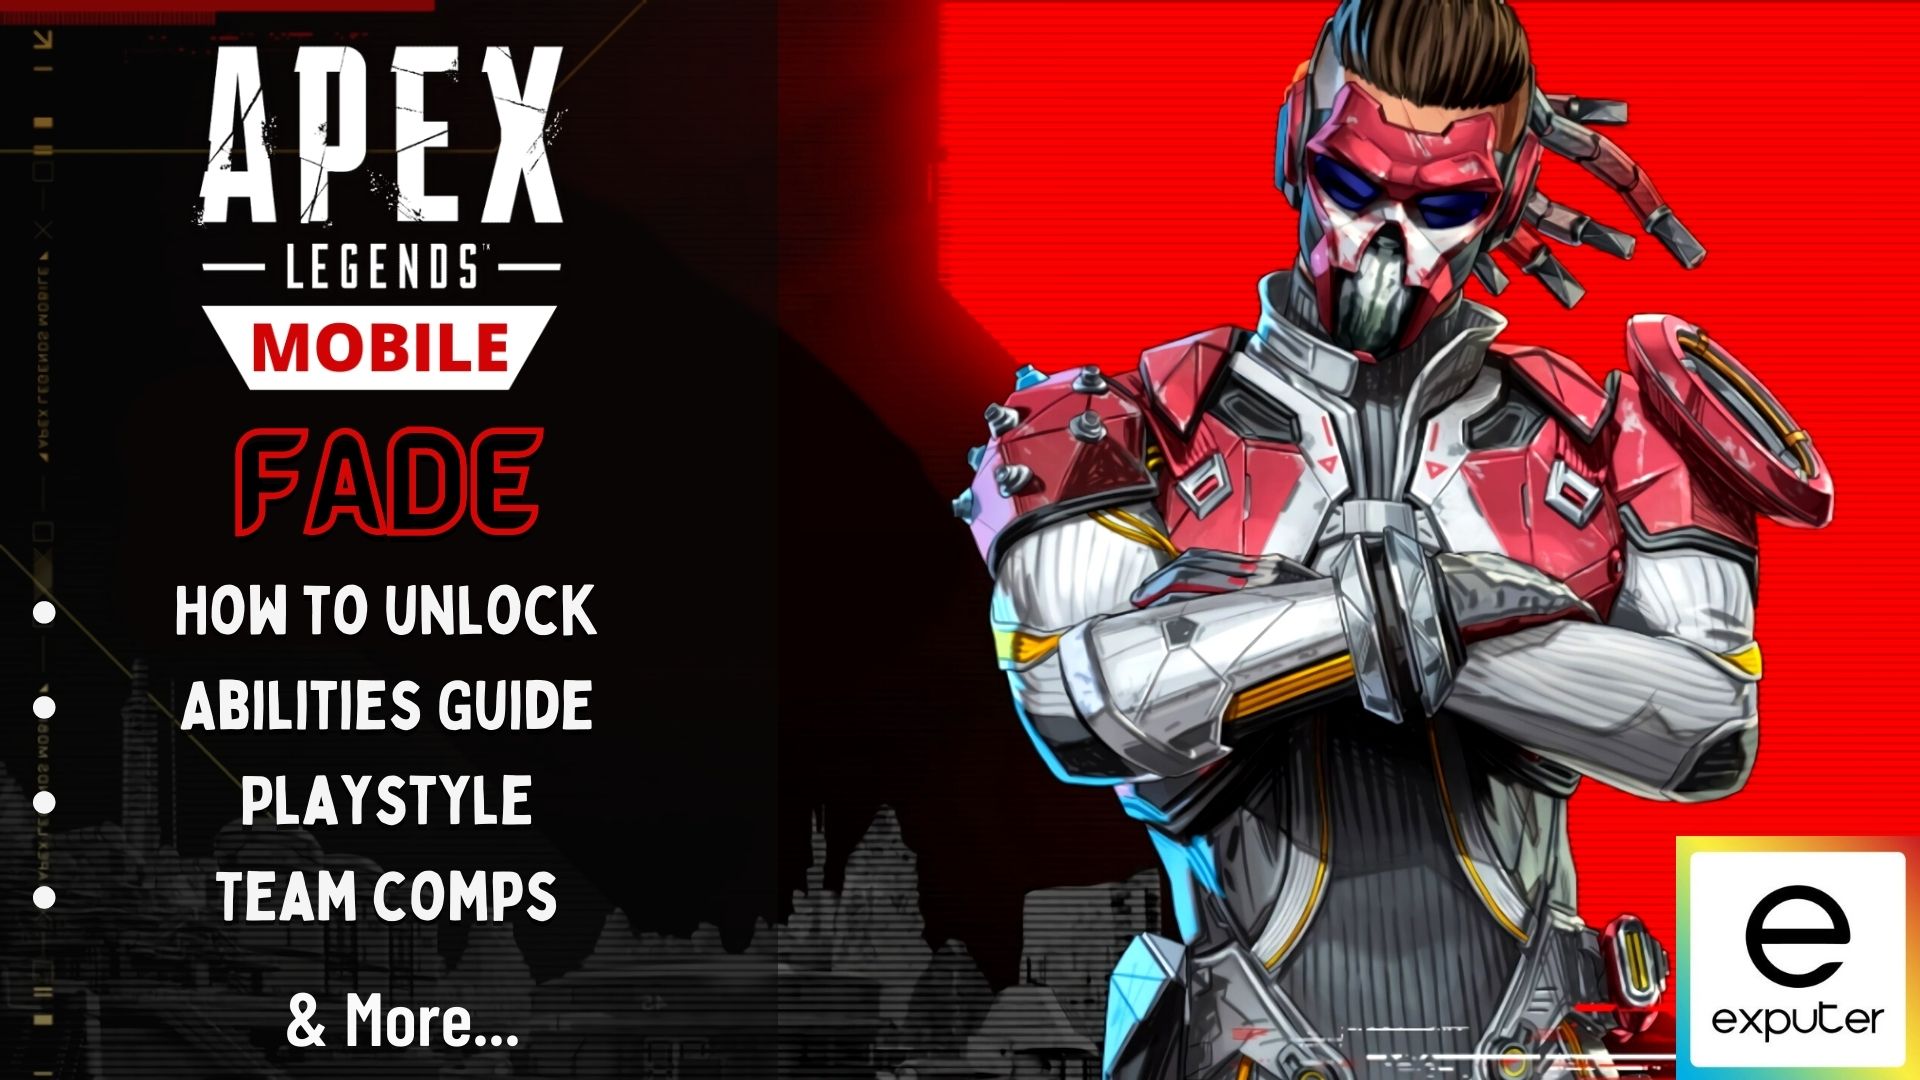 Apex Legends Mobile Fade Unlock Abilities Playstyle